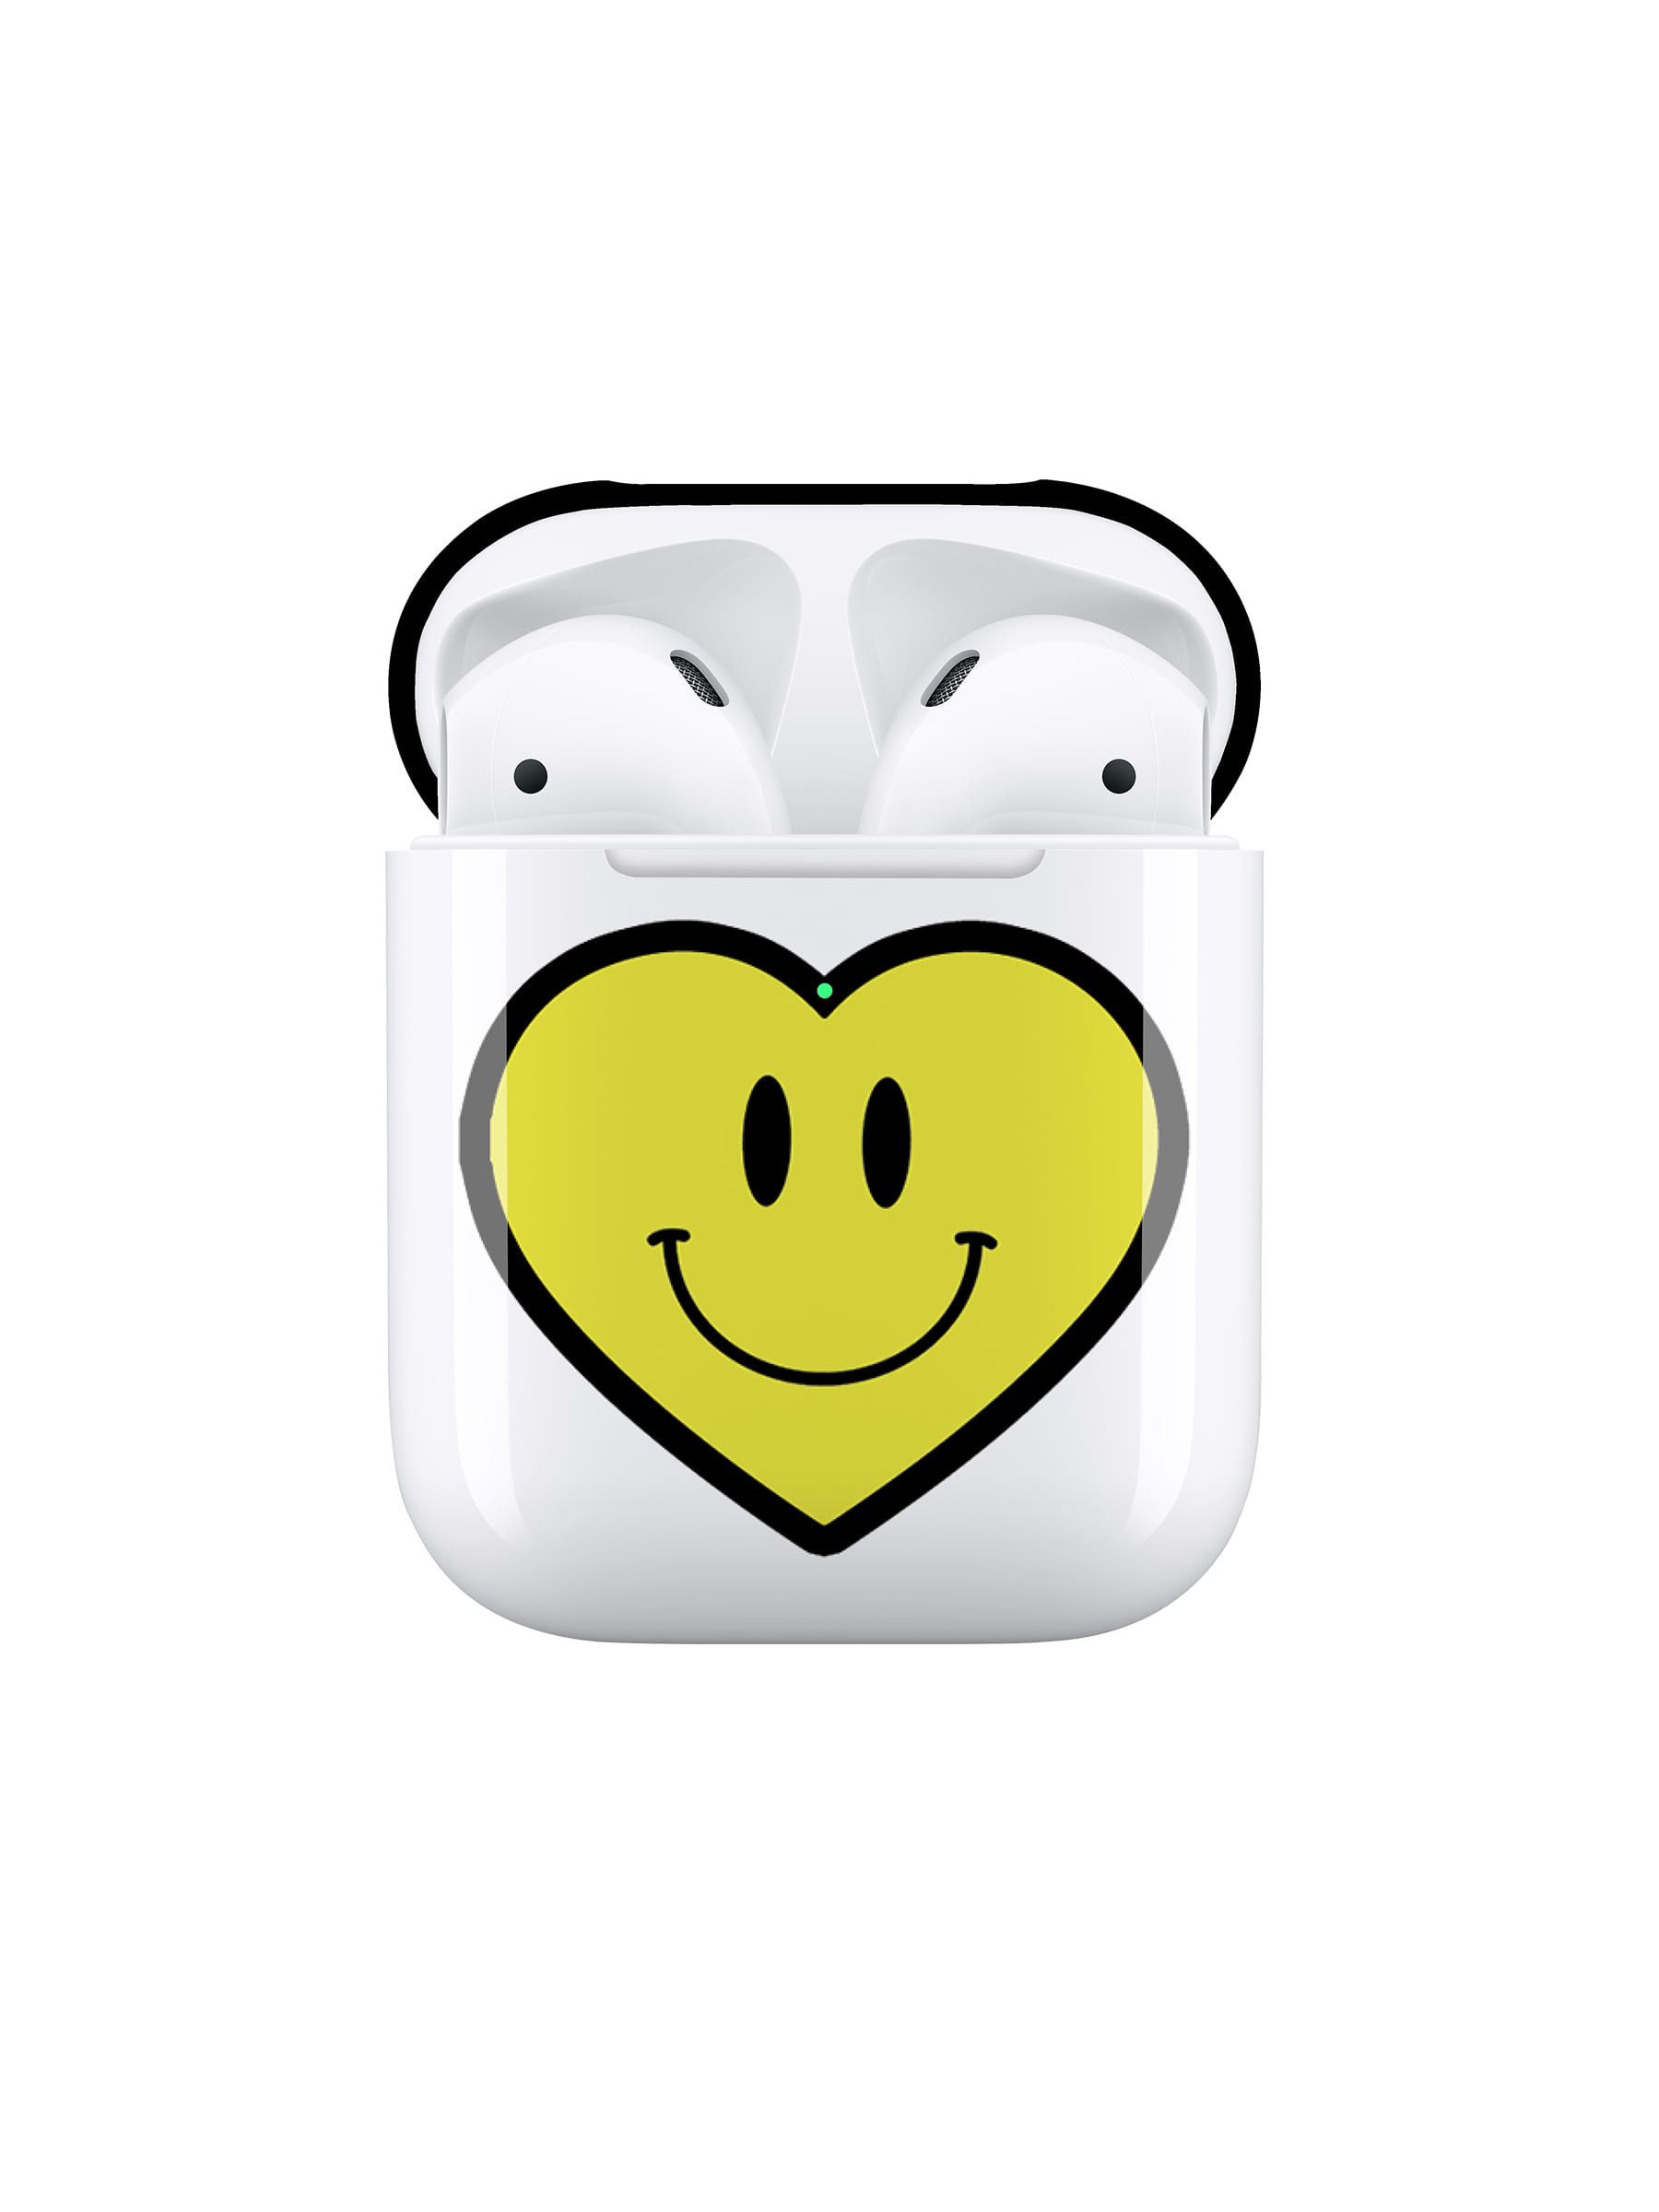 You are loved [ Airpods ]